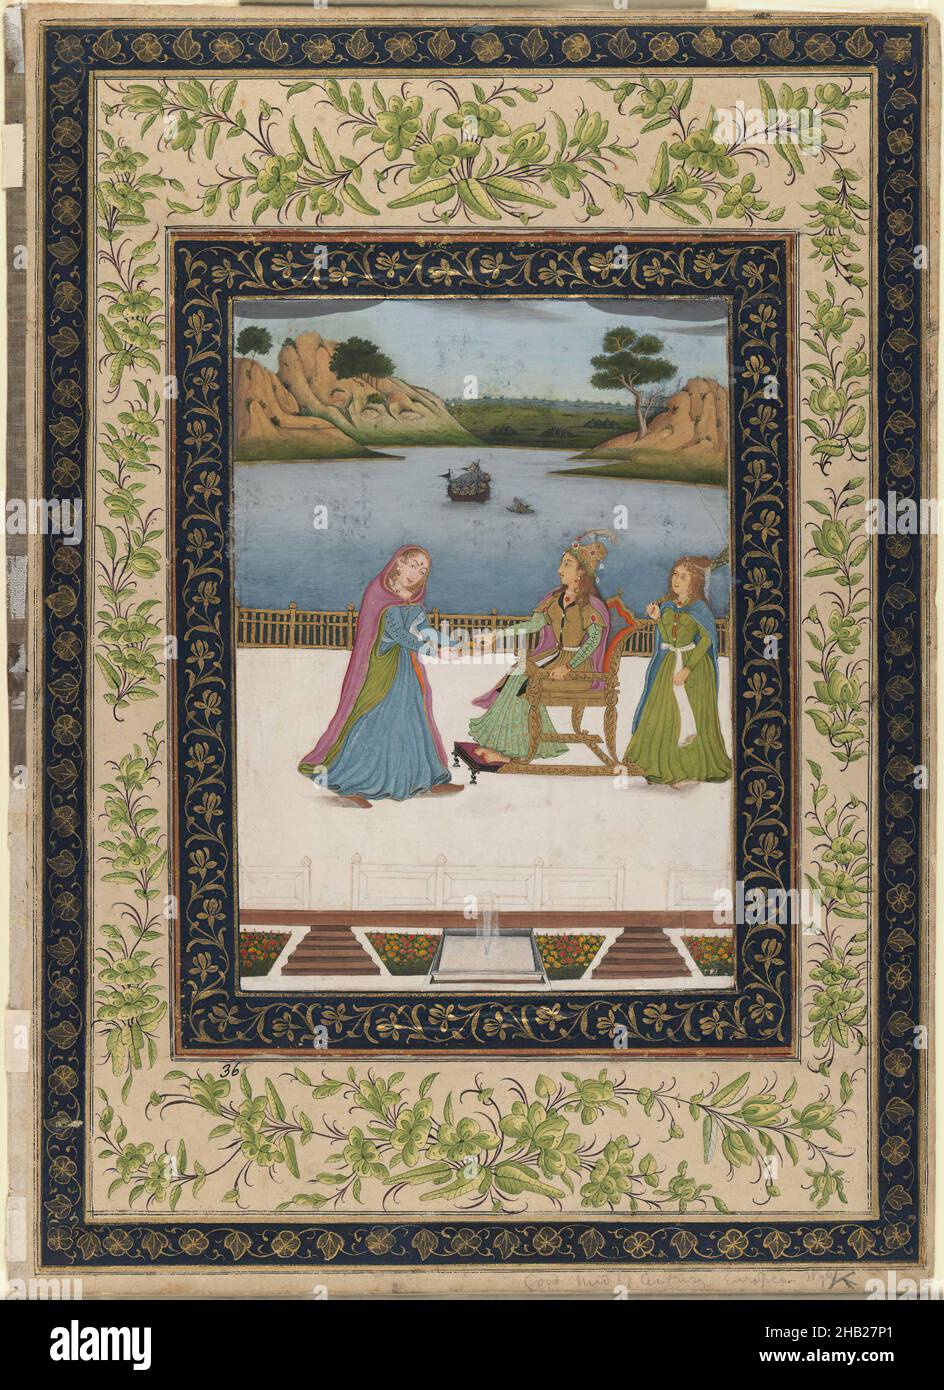 A Woman is Served Fruit on a Terrace, Indian, Opaque watercolors, gold and silver on paper, Lucknow, Oudh, India, ca. 1770, Mughal, 15 9/16 x 11 3/16in., 39.5 x 28.4cm, 18thC, Arabic, chair, dresses, food and drink, Fruit, Gold, lifestyle, Lucknow, Mughal, Nasta'liq, Oudh, Paper, protocol, Ship, Silver, Sultan 'Ali al-Mashhadi, Terrace, water, Watercolor, Woman Stock Photo